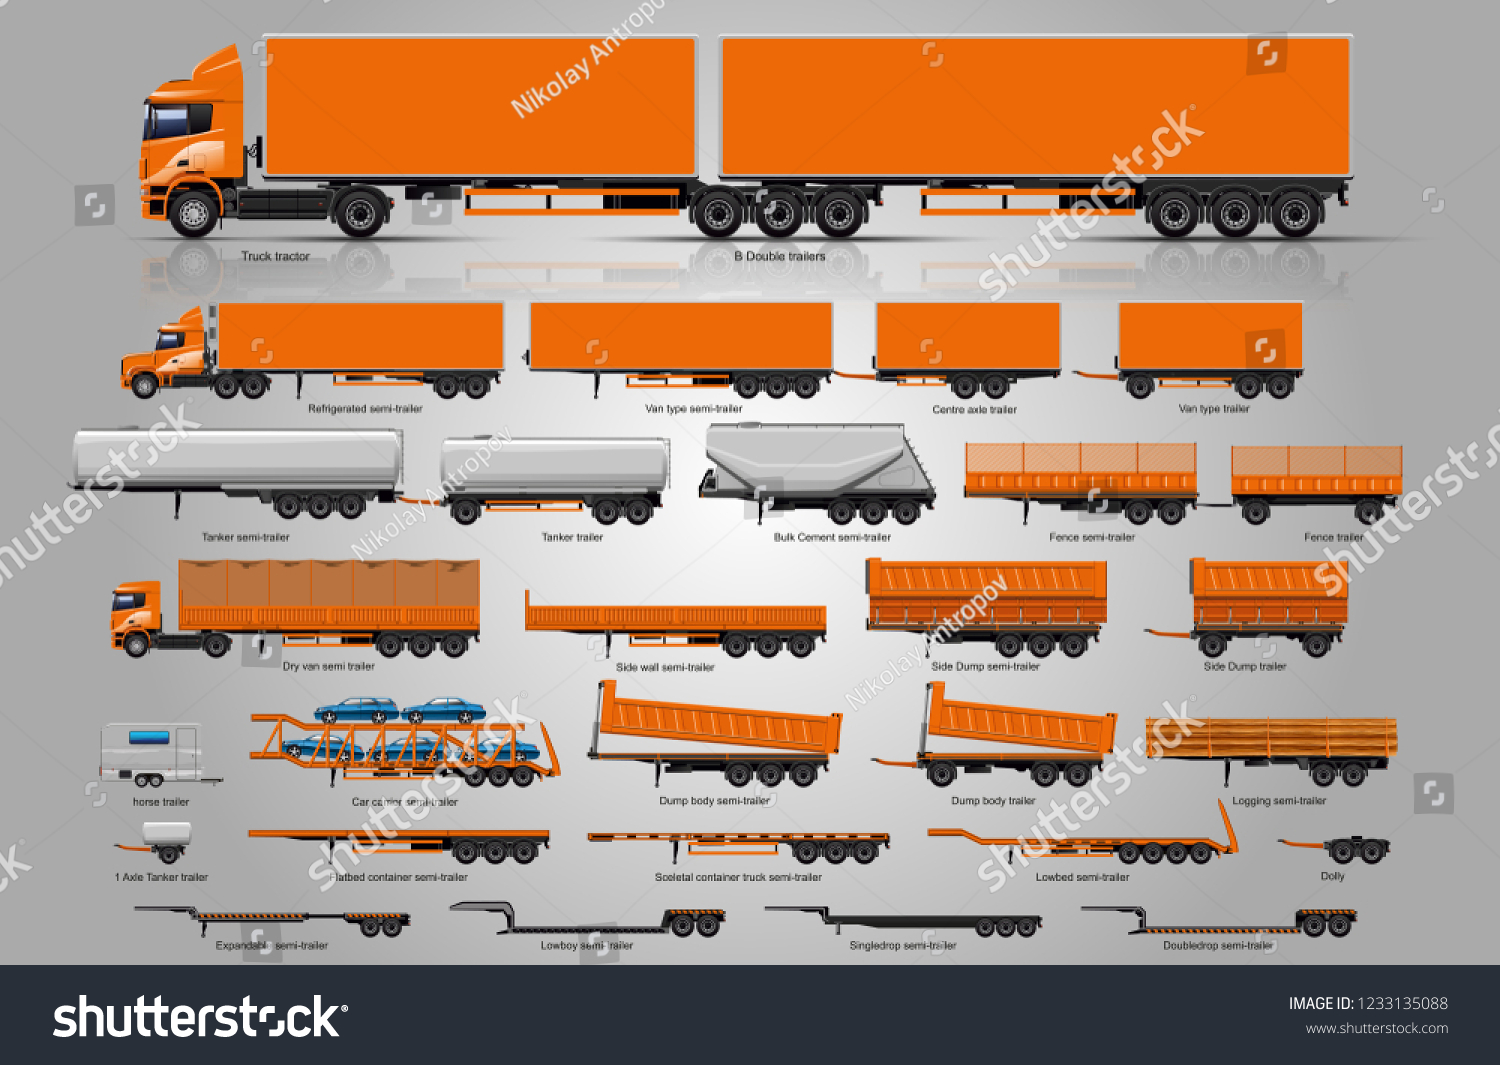 Types of trailers. Big Set of trailers. the largest set of trailers in the world. #1233135088